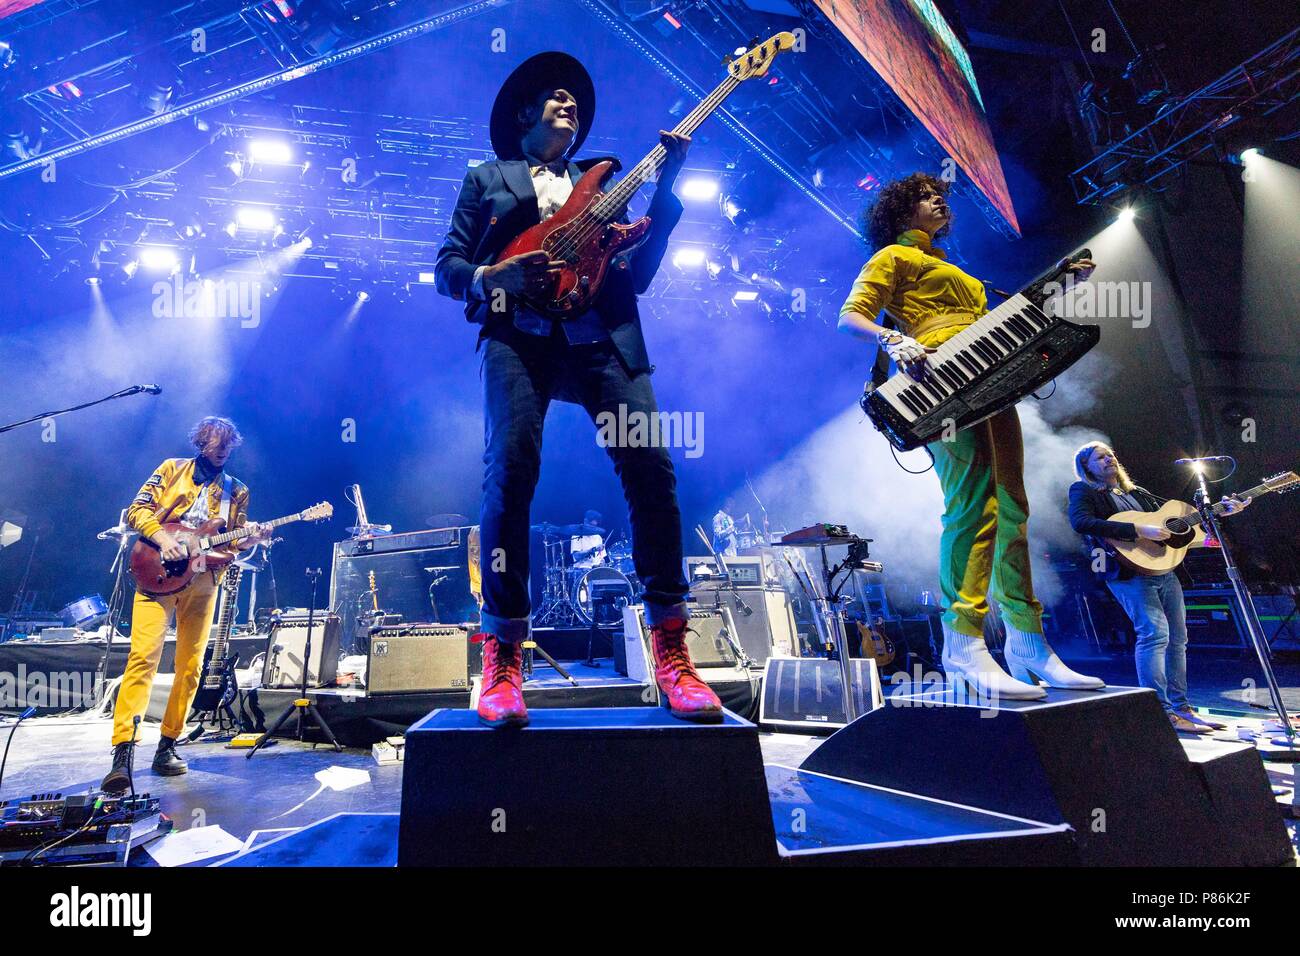 Milwaukee, Wisconsin, USA. 8th July, 2018. RICHARD REED PARRY, WIN BUTLER, REGINE CHASSAGNE and TIM KINGSBURY of Arcade Fire during Summerfest Music Festival at Henry Maier Festival Park in Milwaukee, Wisconsin Credit: Daniel DeSlover/ZUMA Wire/Alamy Live News Stock Photo